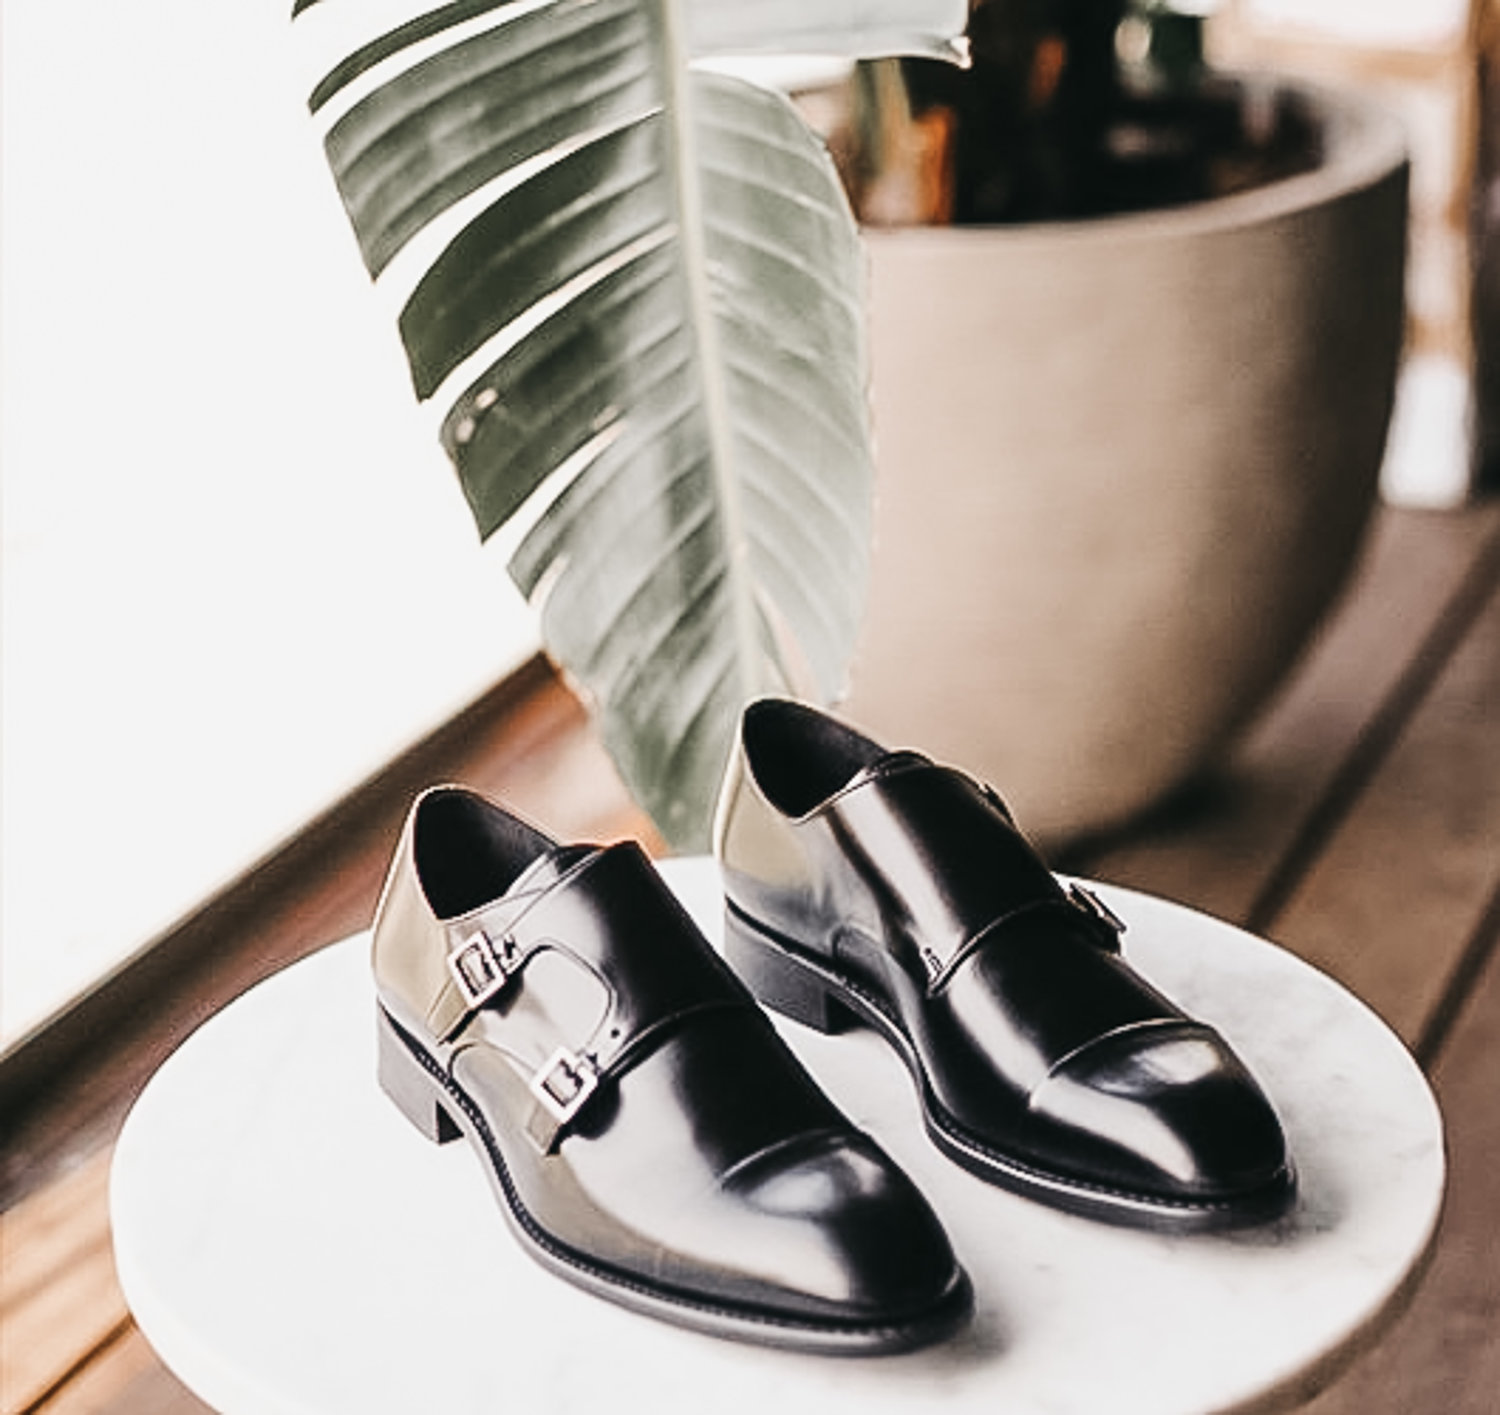 The Best Leather Shoes for Men in 2018 - Mens Leather Shoe Styles